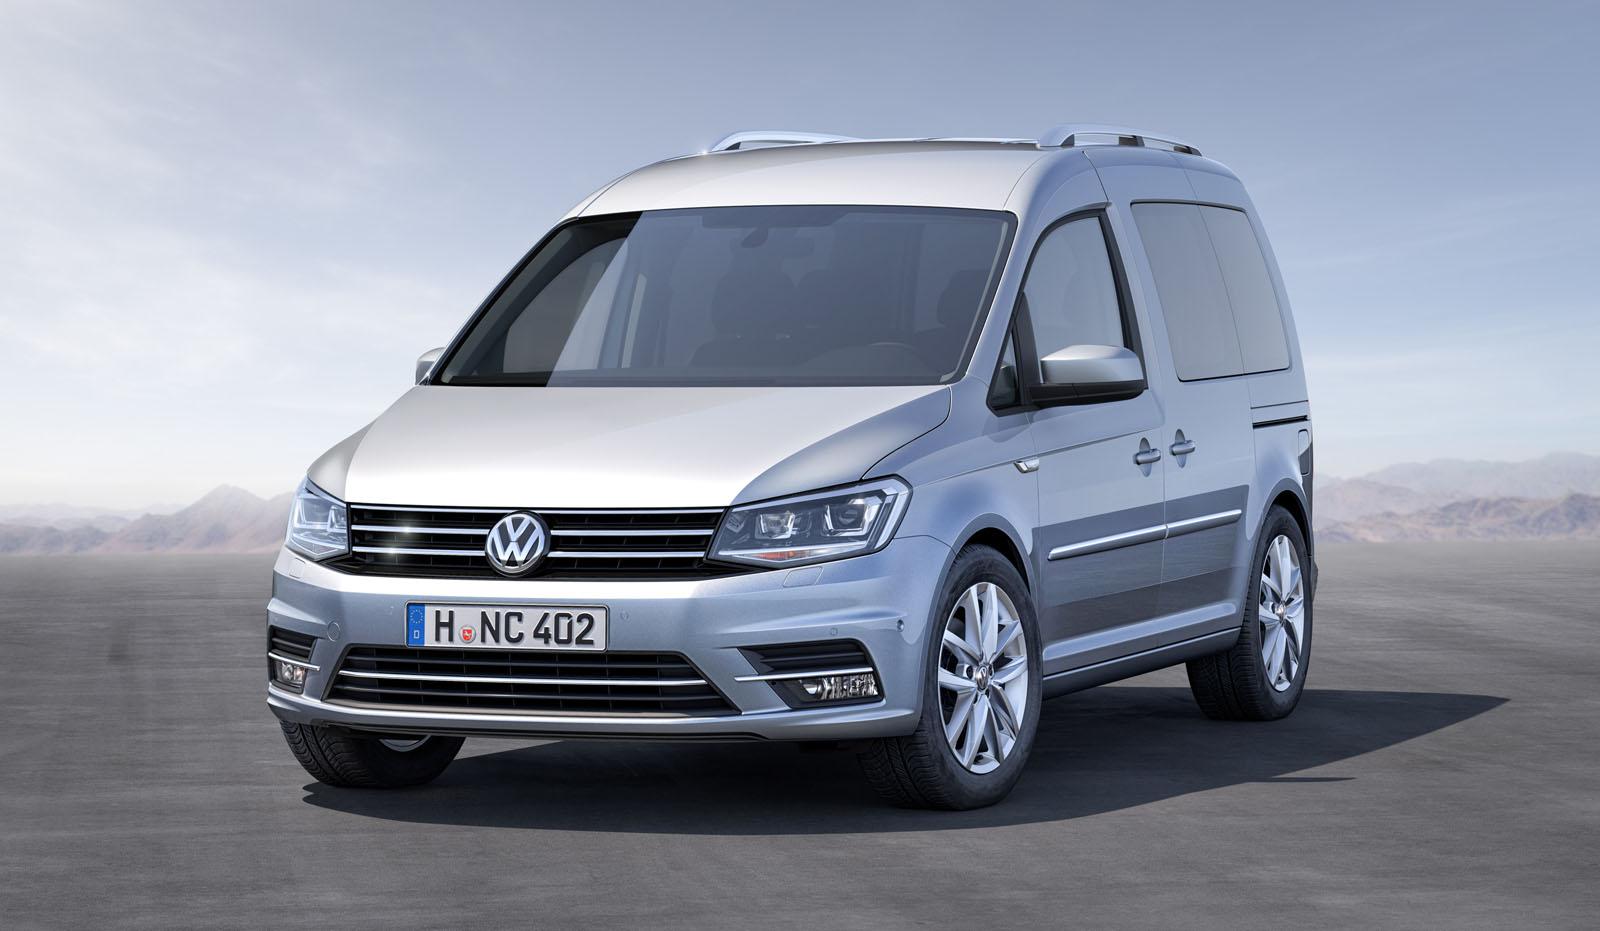 2015 Volkswagen Caddy Unveiled with New 1.0 TSI 3Cylinder